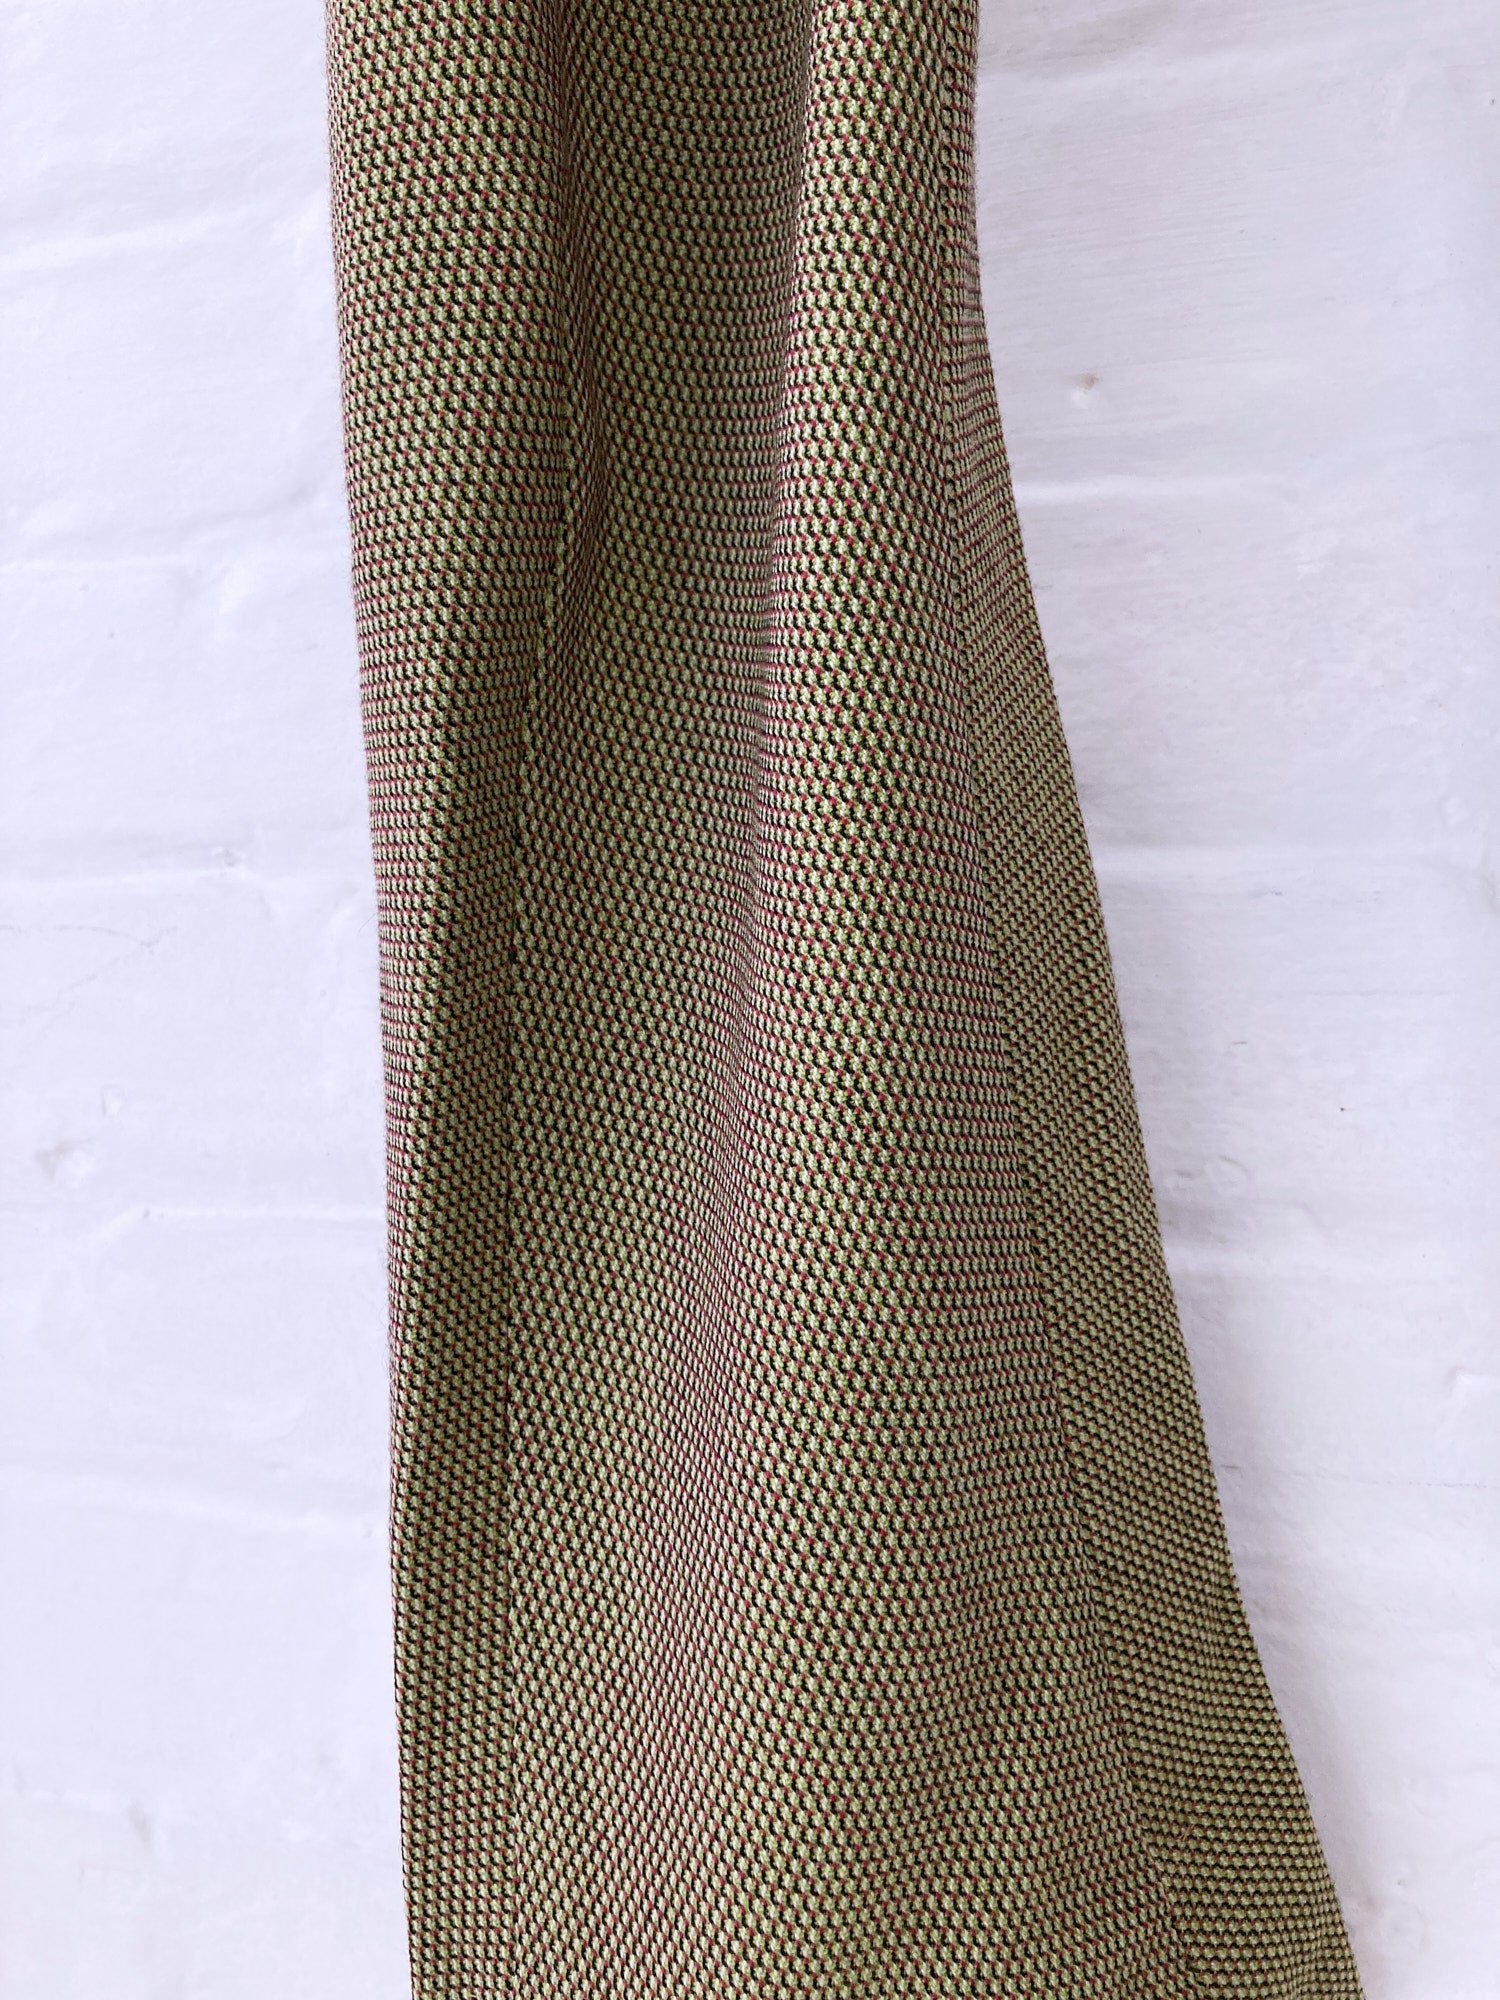 Junya Watanabe Comme des Garcons AW1997 textured green wool 3D panelled trousers